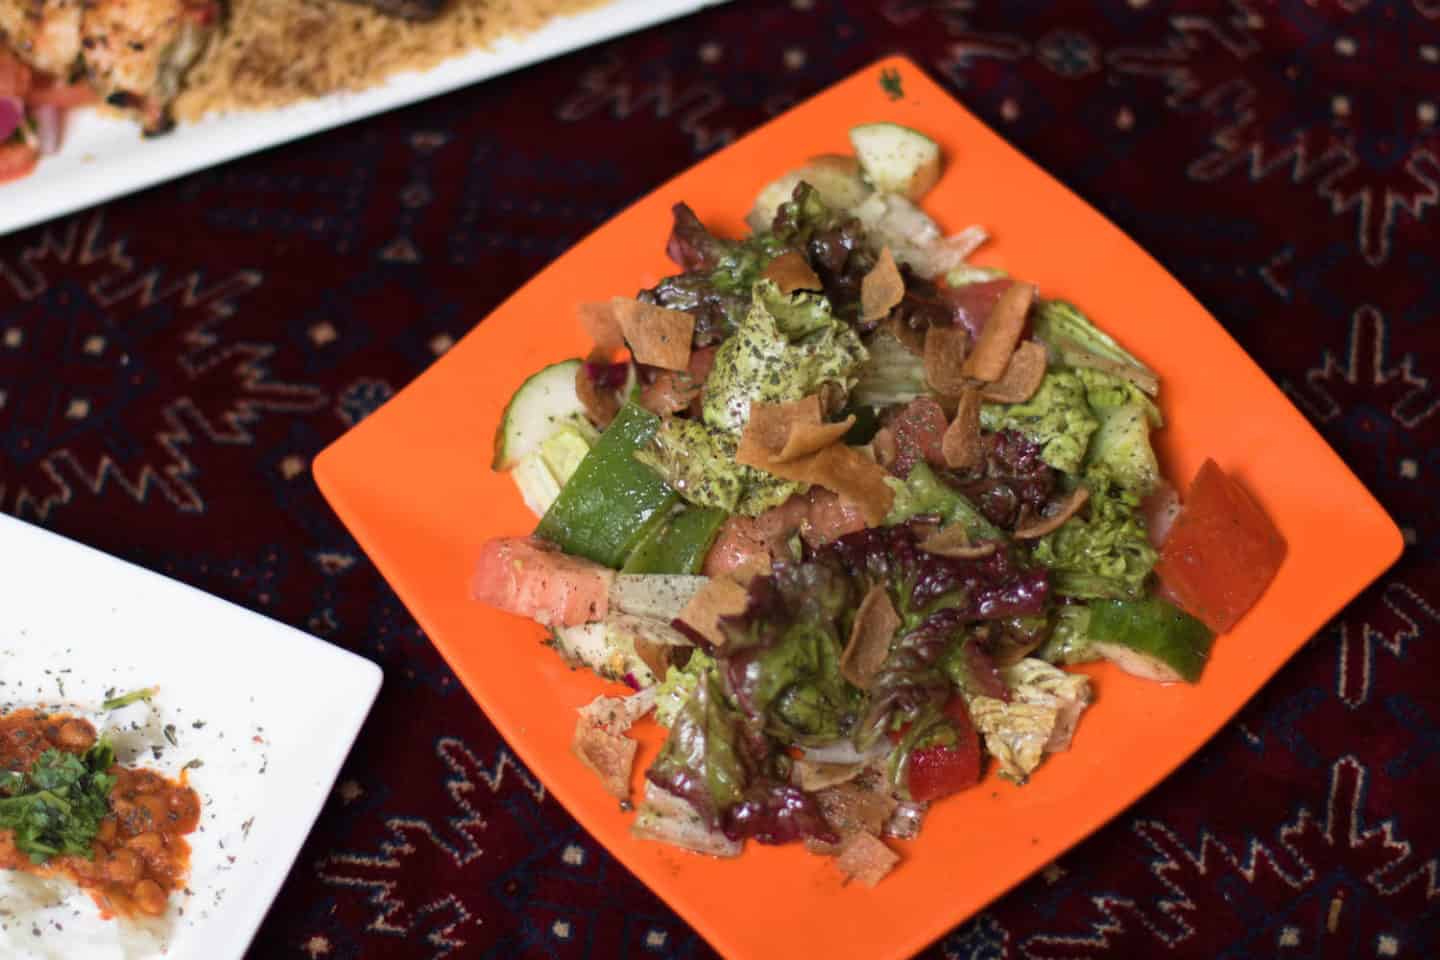 Fattoush Salad at Naan & Kabob, one of Toronto's best Afghan restaurants